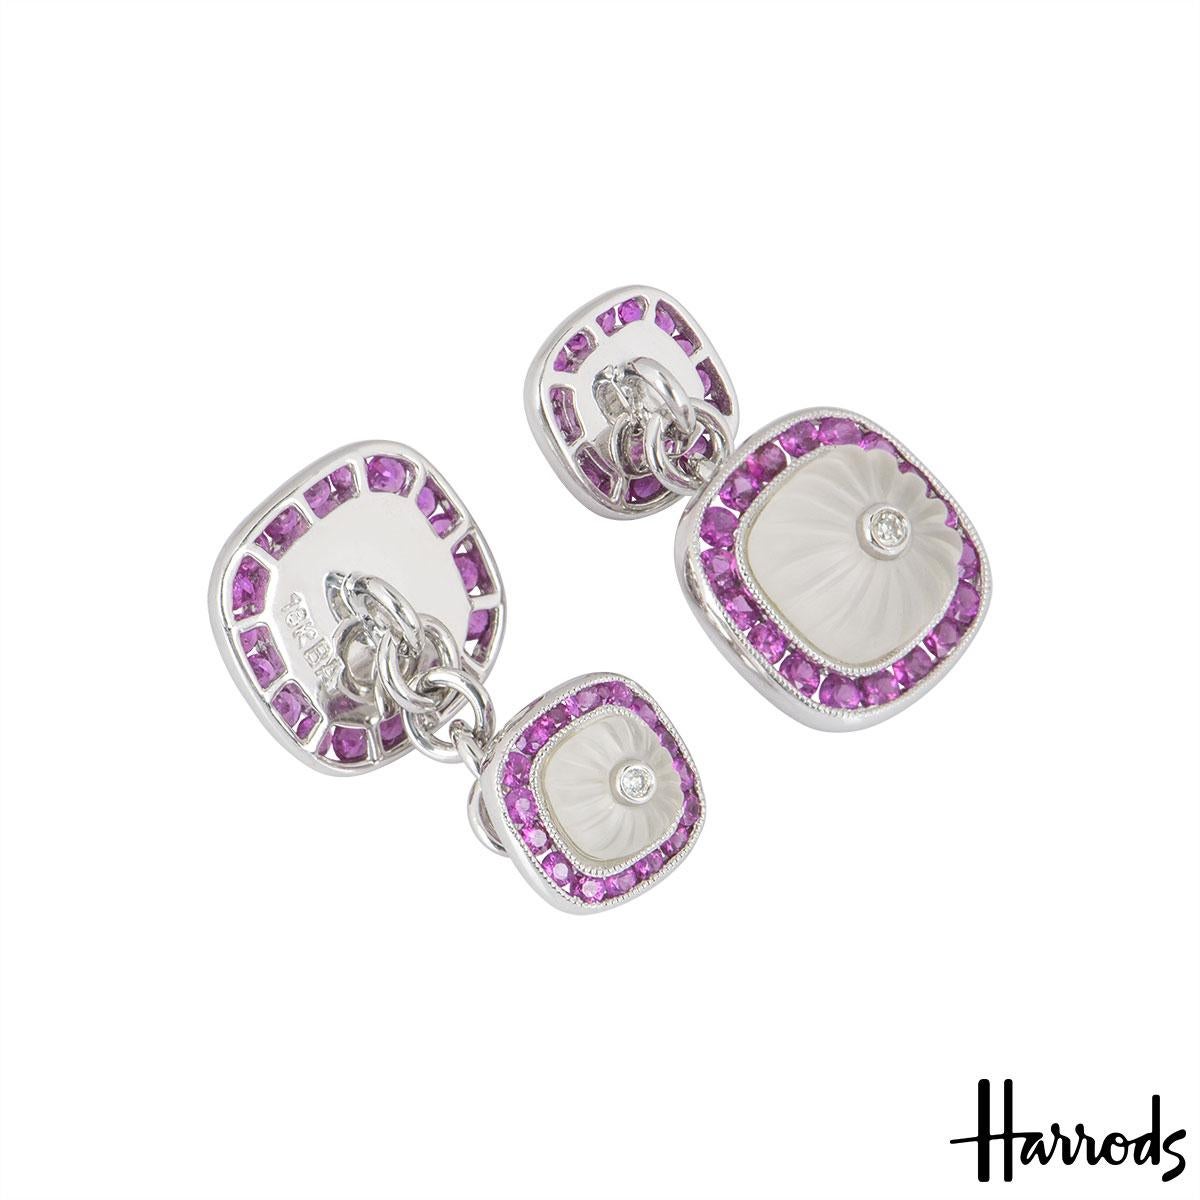 An 18k white gold pair of diamond and multi-gem cufflinks. The cufflinks are composed of 2 carved crystal stones alternating in size set with a round brilliant cut diamond in the centre surrounded by round rubies in a pave setting. The cufflinks are